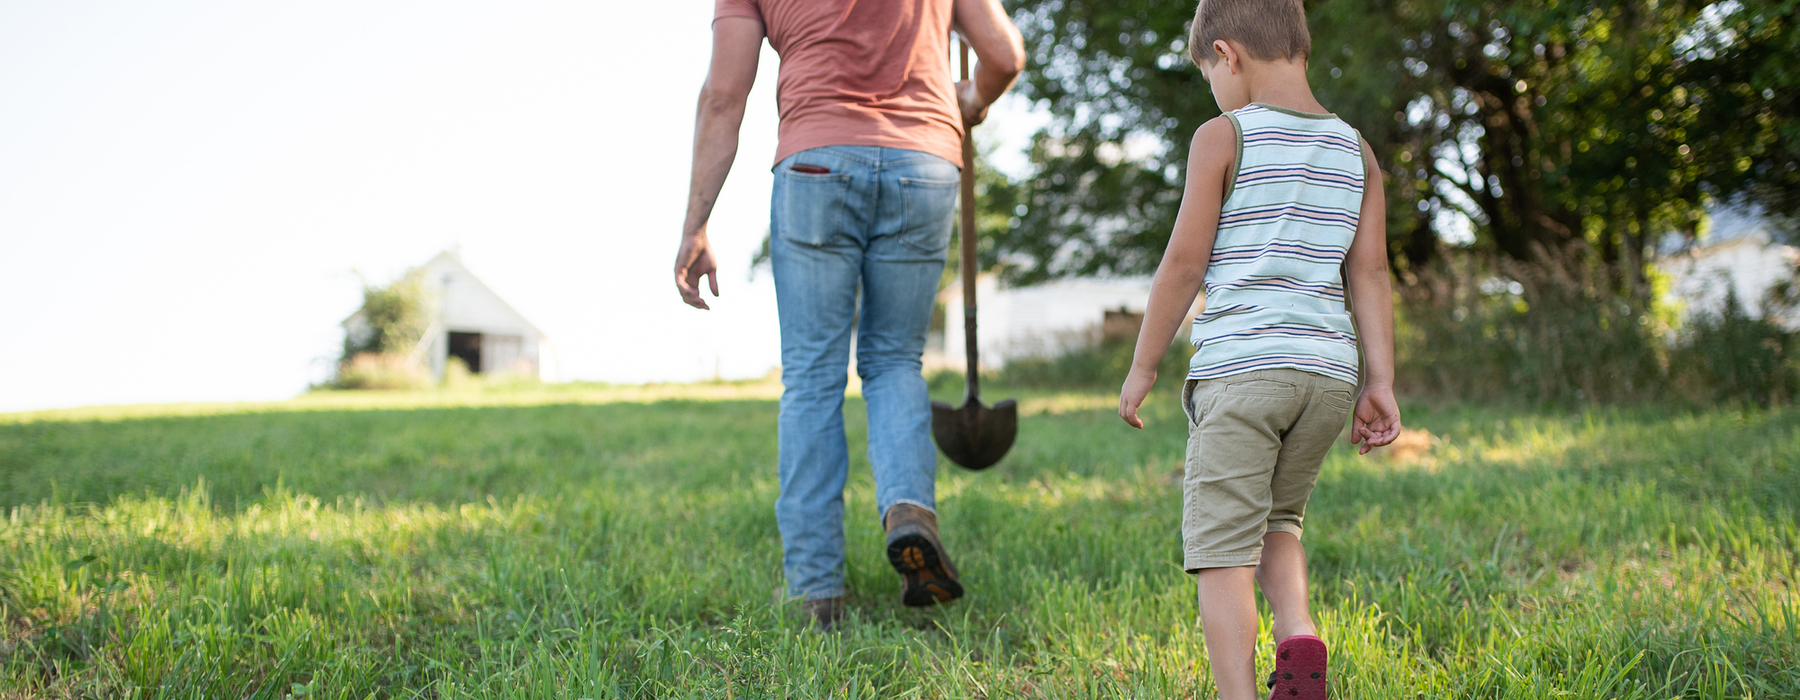 A man in jeans, peach shirt, holding a shovel walks through a grass pasture followed by a young boy in tan shorts and a white and tan striped tank top